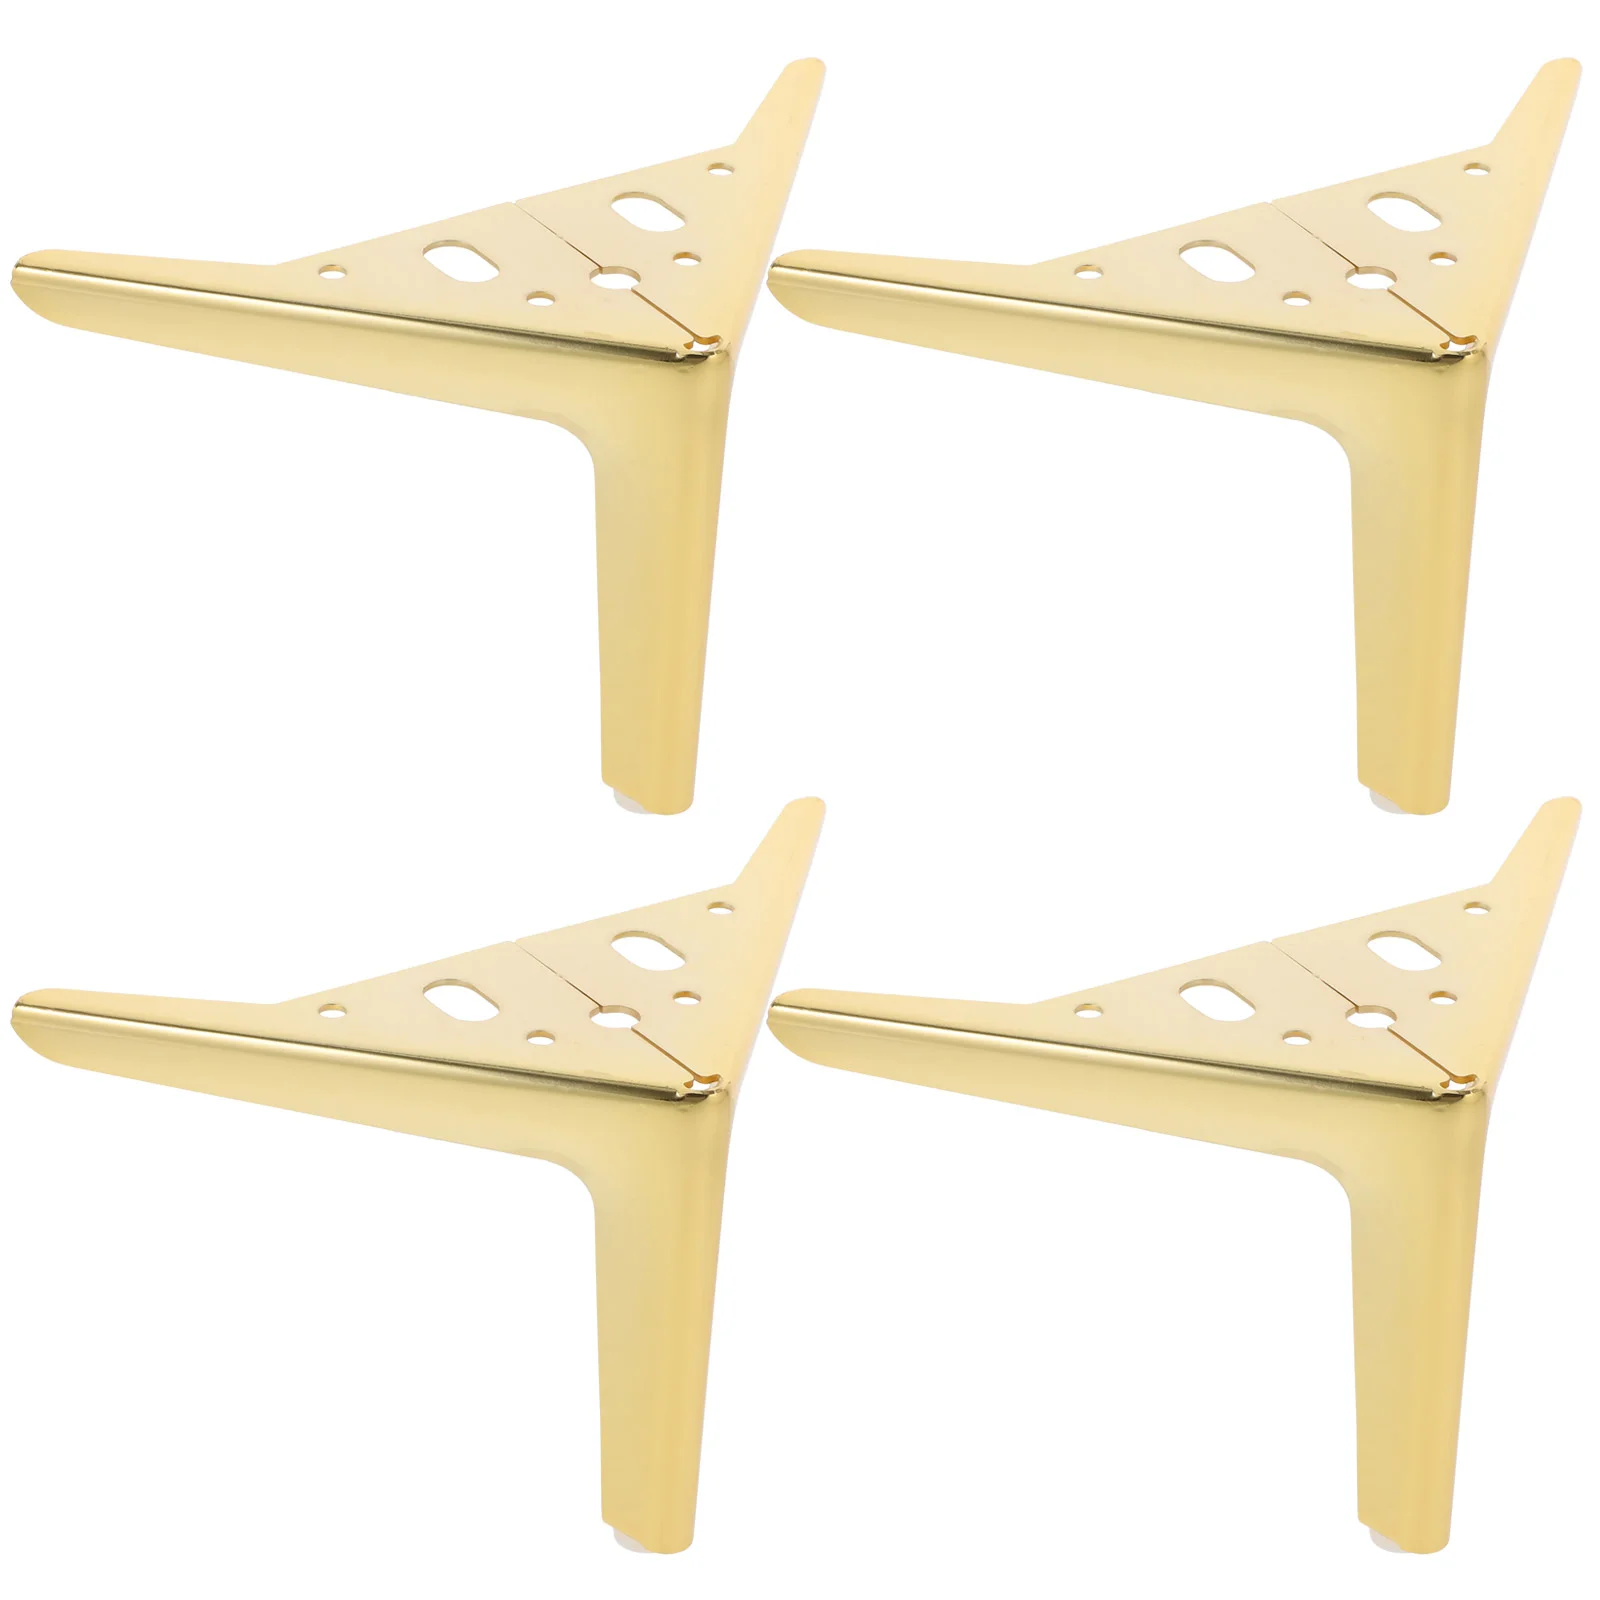 

4 Pcs Furniture Heightening Pads Gold Dresser Metal Legs Sofa Support Couch Cold Rolled Steel Chair Short Table Feet